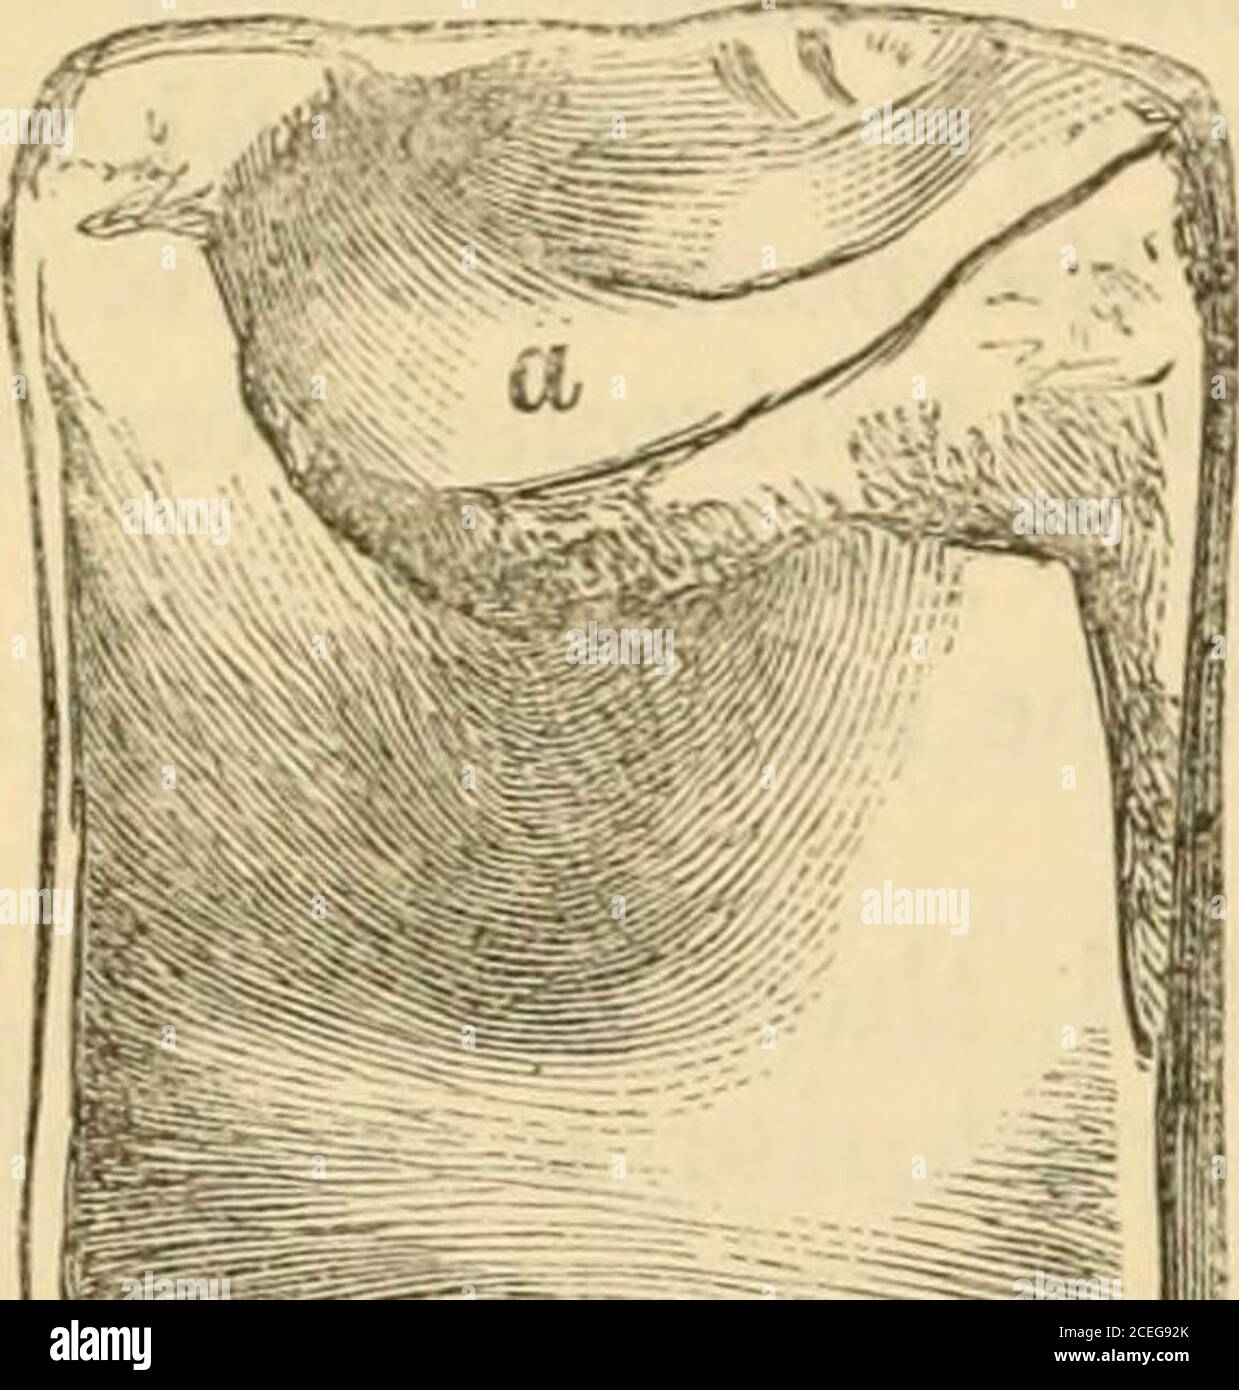 . The Quarterly journal of the Geological Society of London. ep. The 21st vertebra also has the rib partly on thecentrum and partly on the neural arch; and therefore these twovertebras between the neck and the back form the region namedpectoral. Dorsal Vertebrae (figs. 5, 6). The 22nd centrum may be regarded as the first dorsal. Theintervertebral articular face has become much more nearly circular,being 3-J- inches deep, and 3-| inches wide. The articular faces areslightly concave, with a large ill-defined eminence below the middle—a character also seen in subsequent vertebras. The centrum is Stock Photo